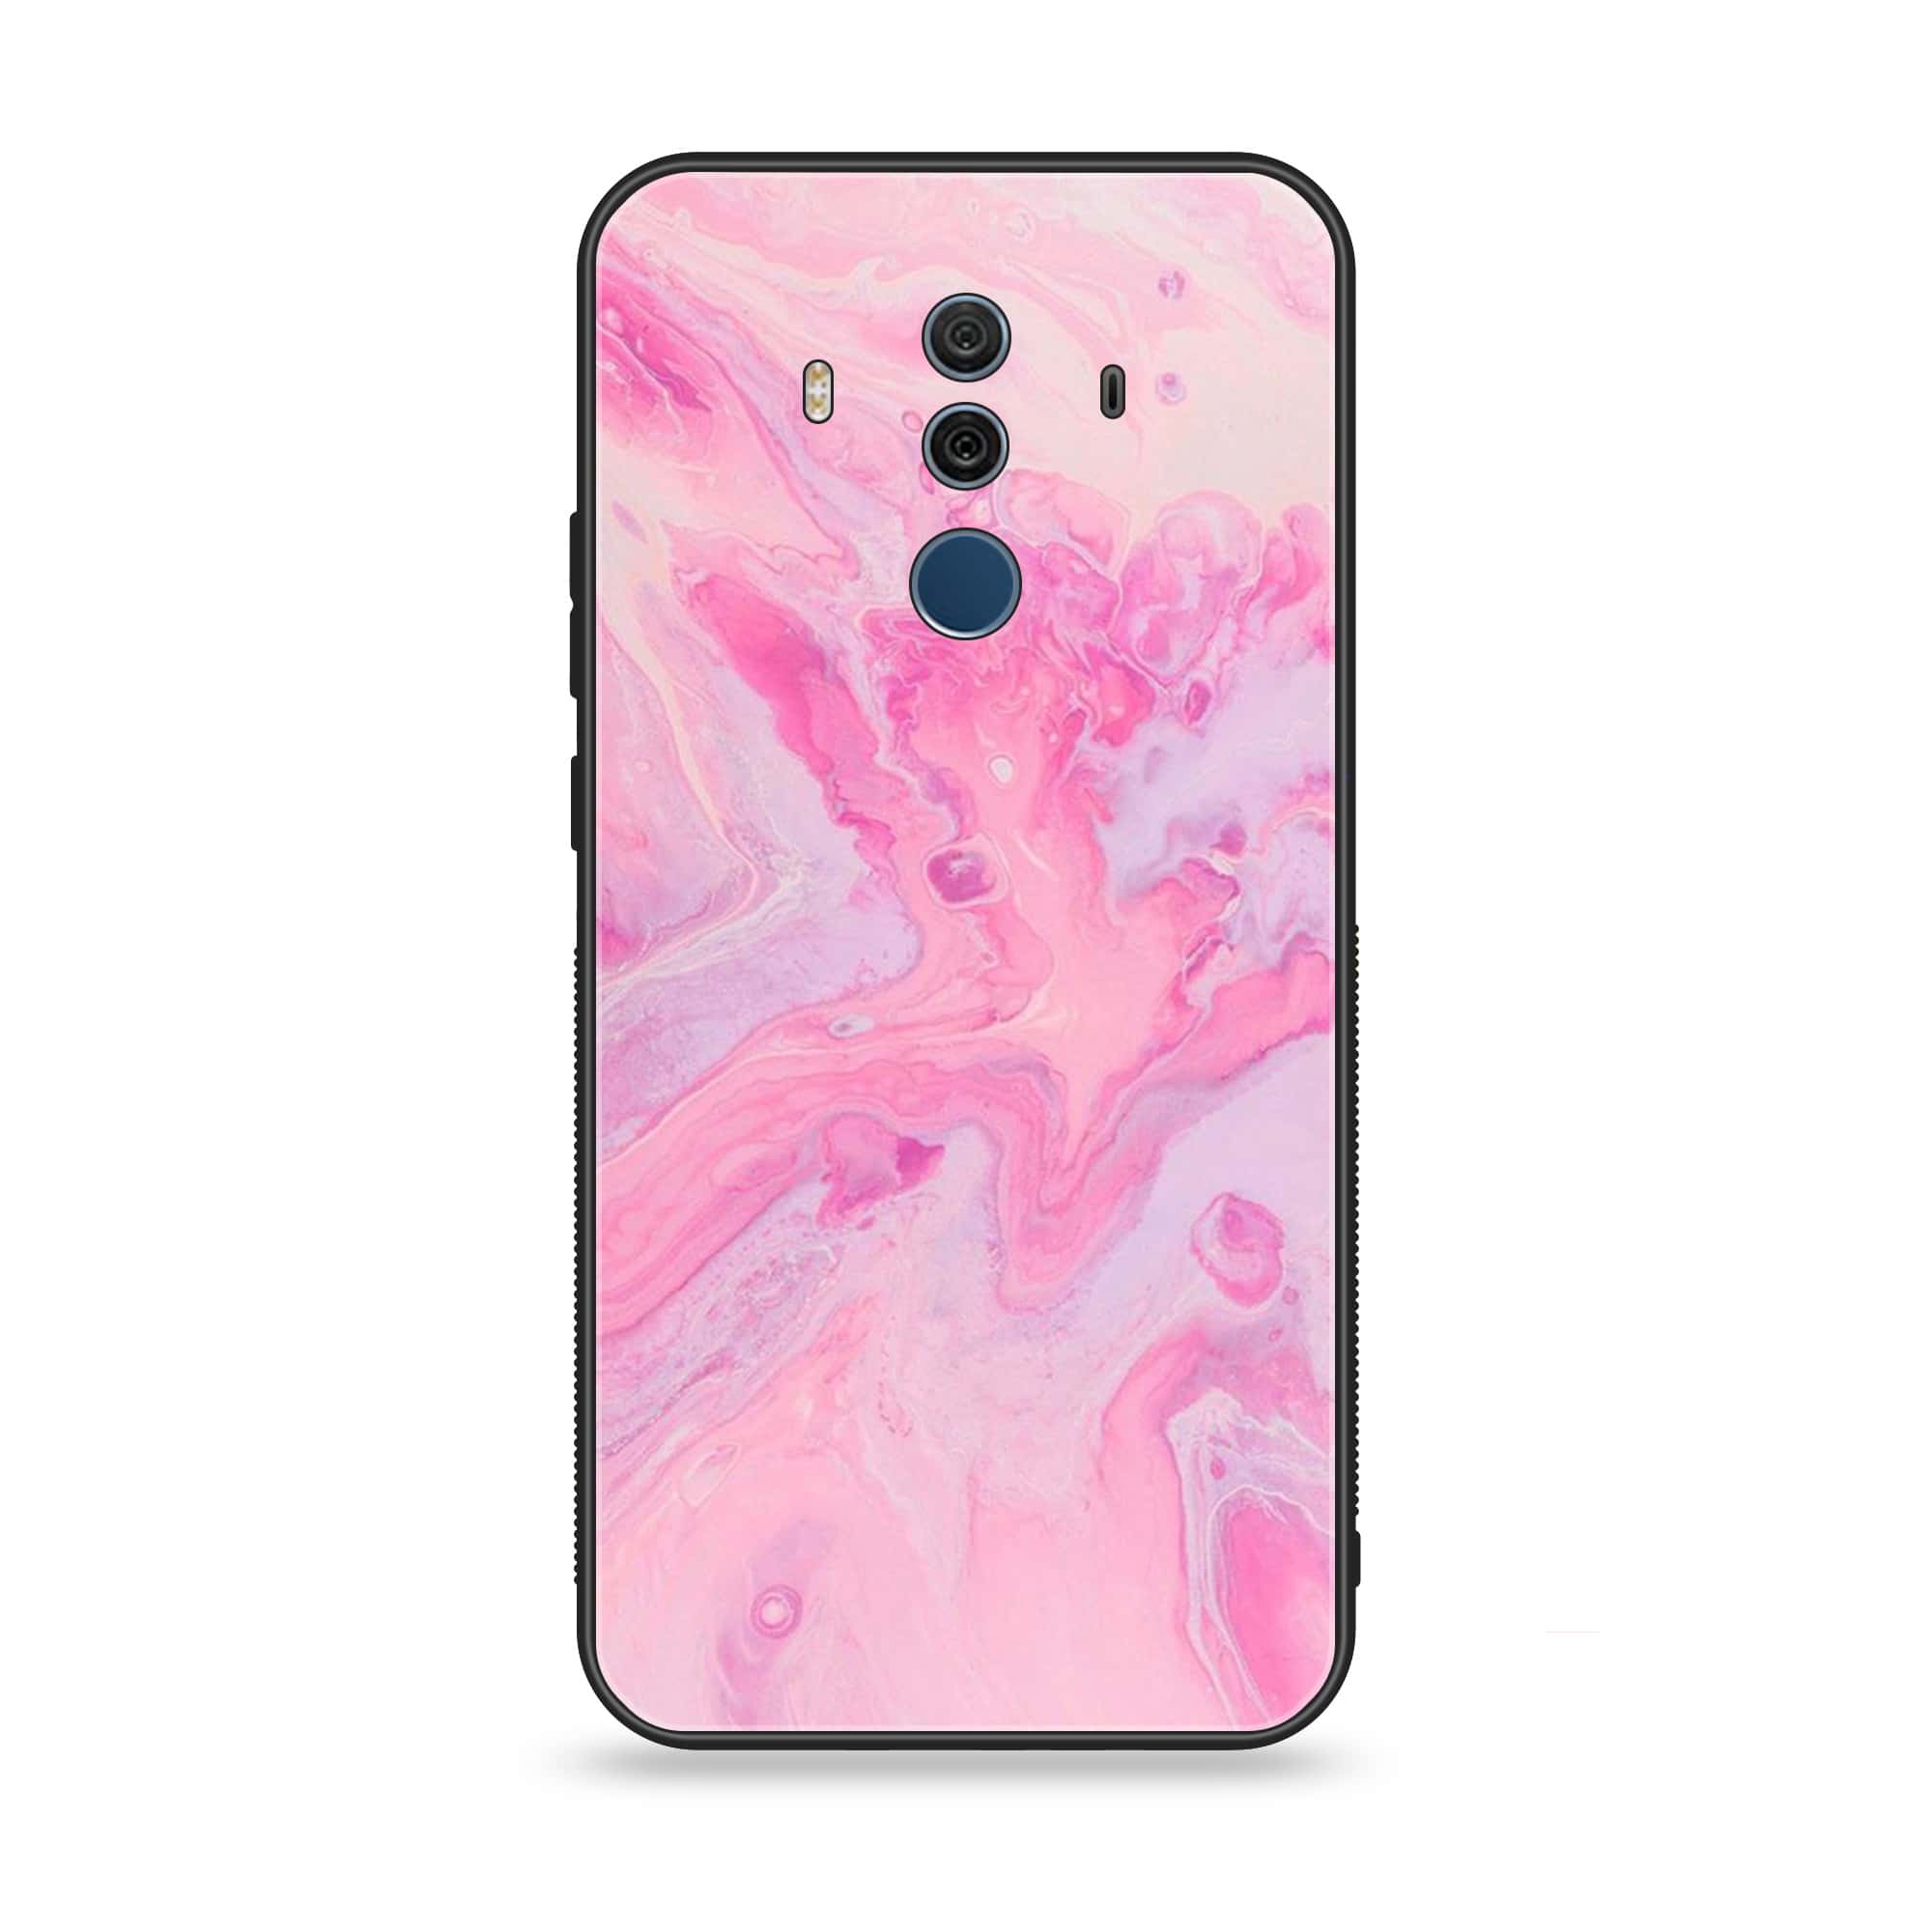 Huawei Mate 10 Pro - Pink Marble Series - Premium Printed Glass soft Bumper shock Proof Case